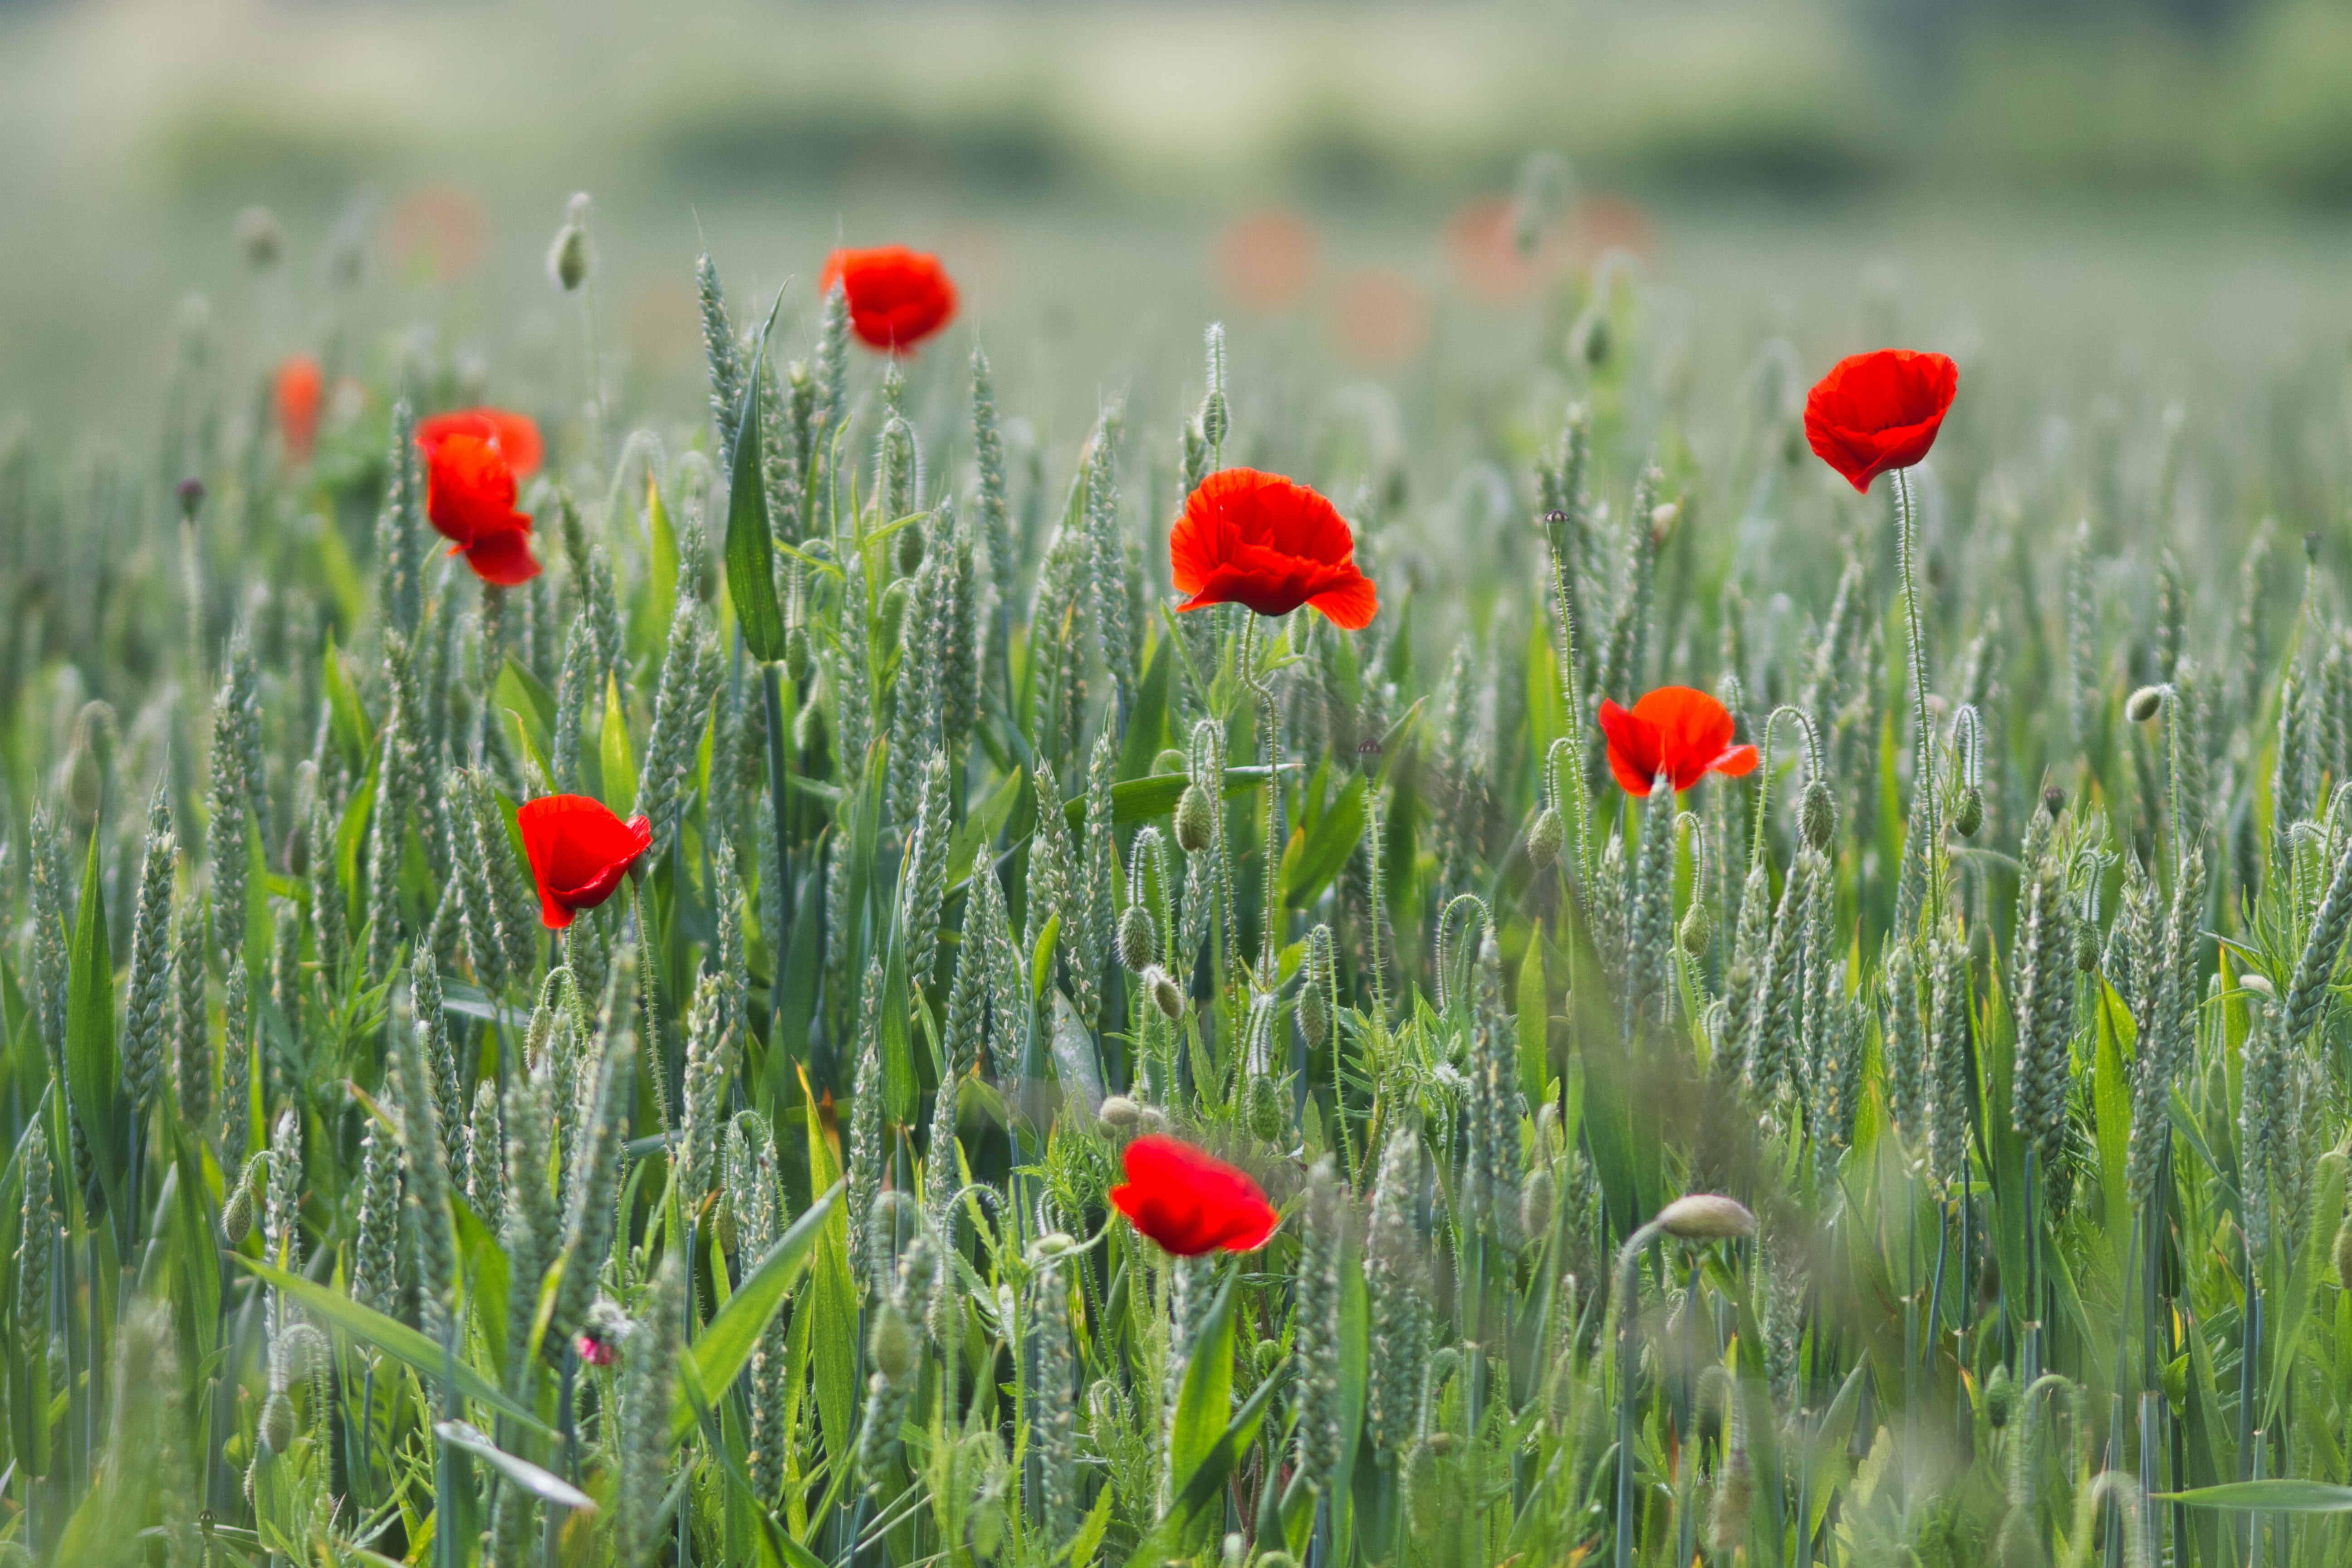 red flowers in green grass field during daytime